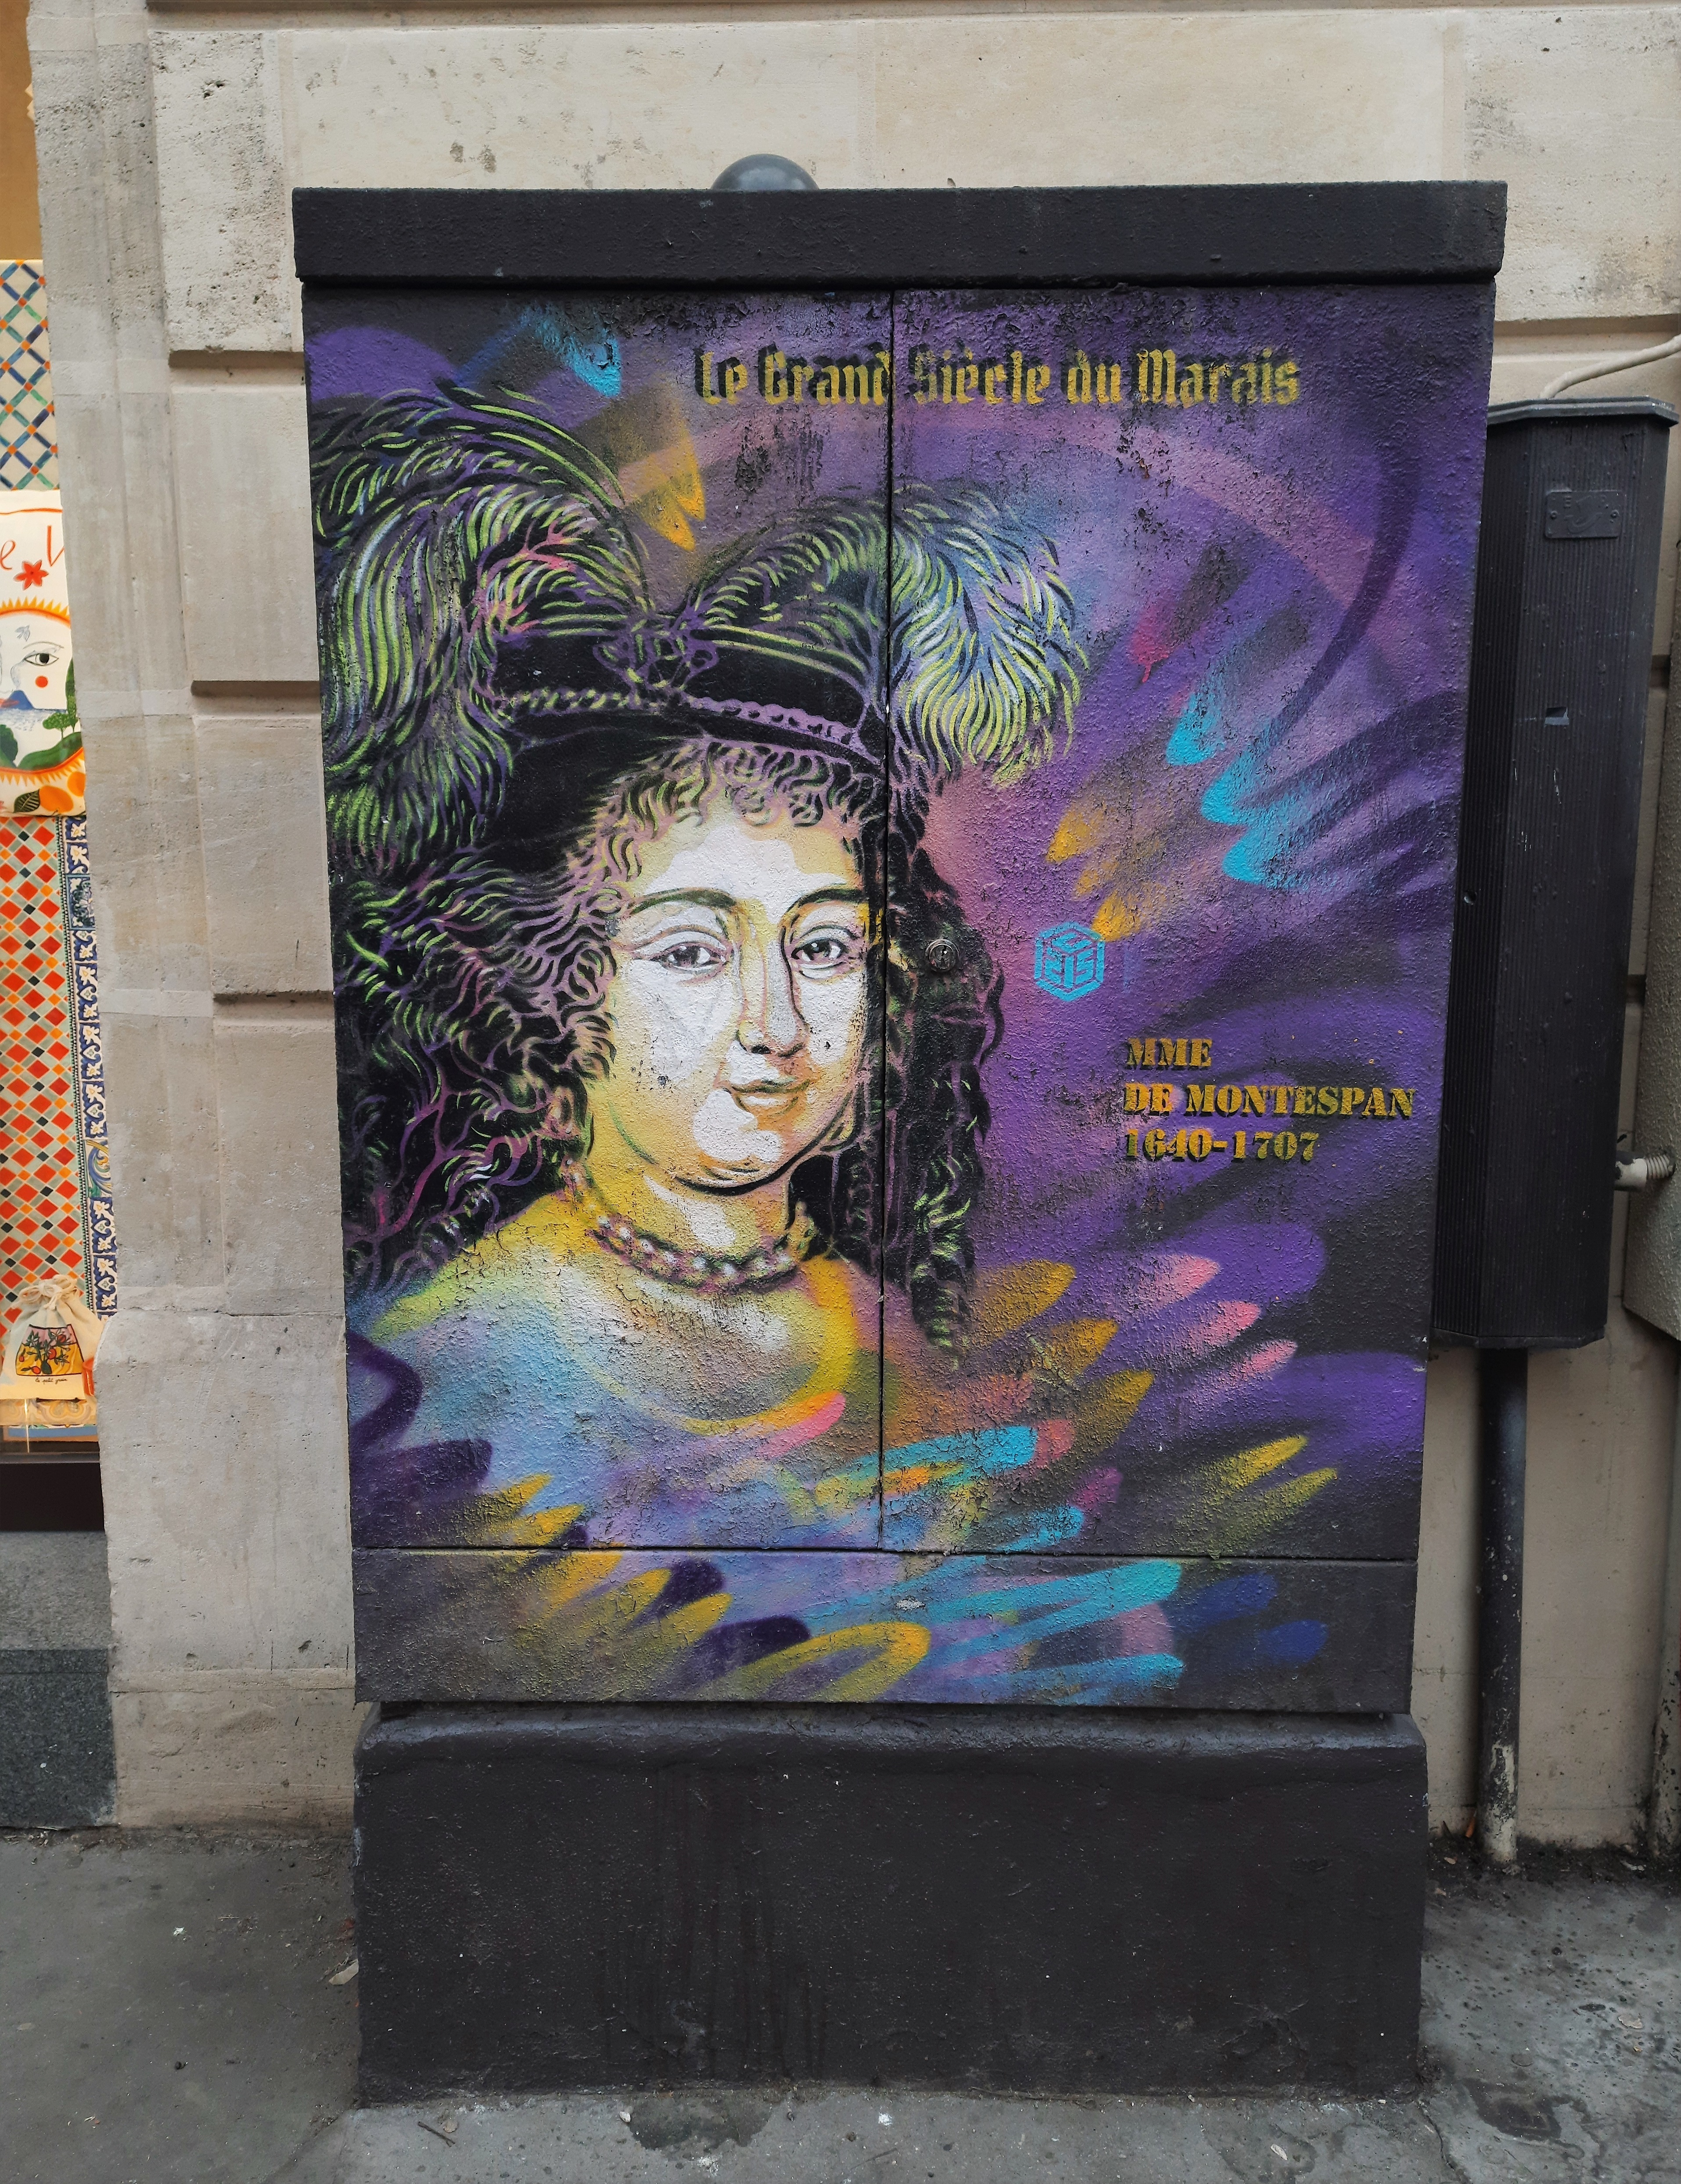 Graffiti 6540 Mme de Montespan by the artist C215 captured by Mephisroth in Paris France